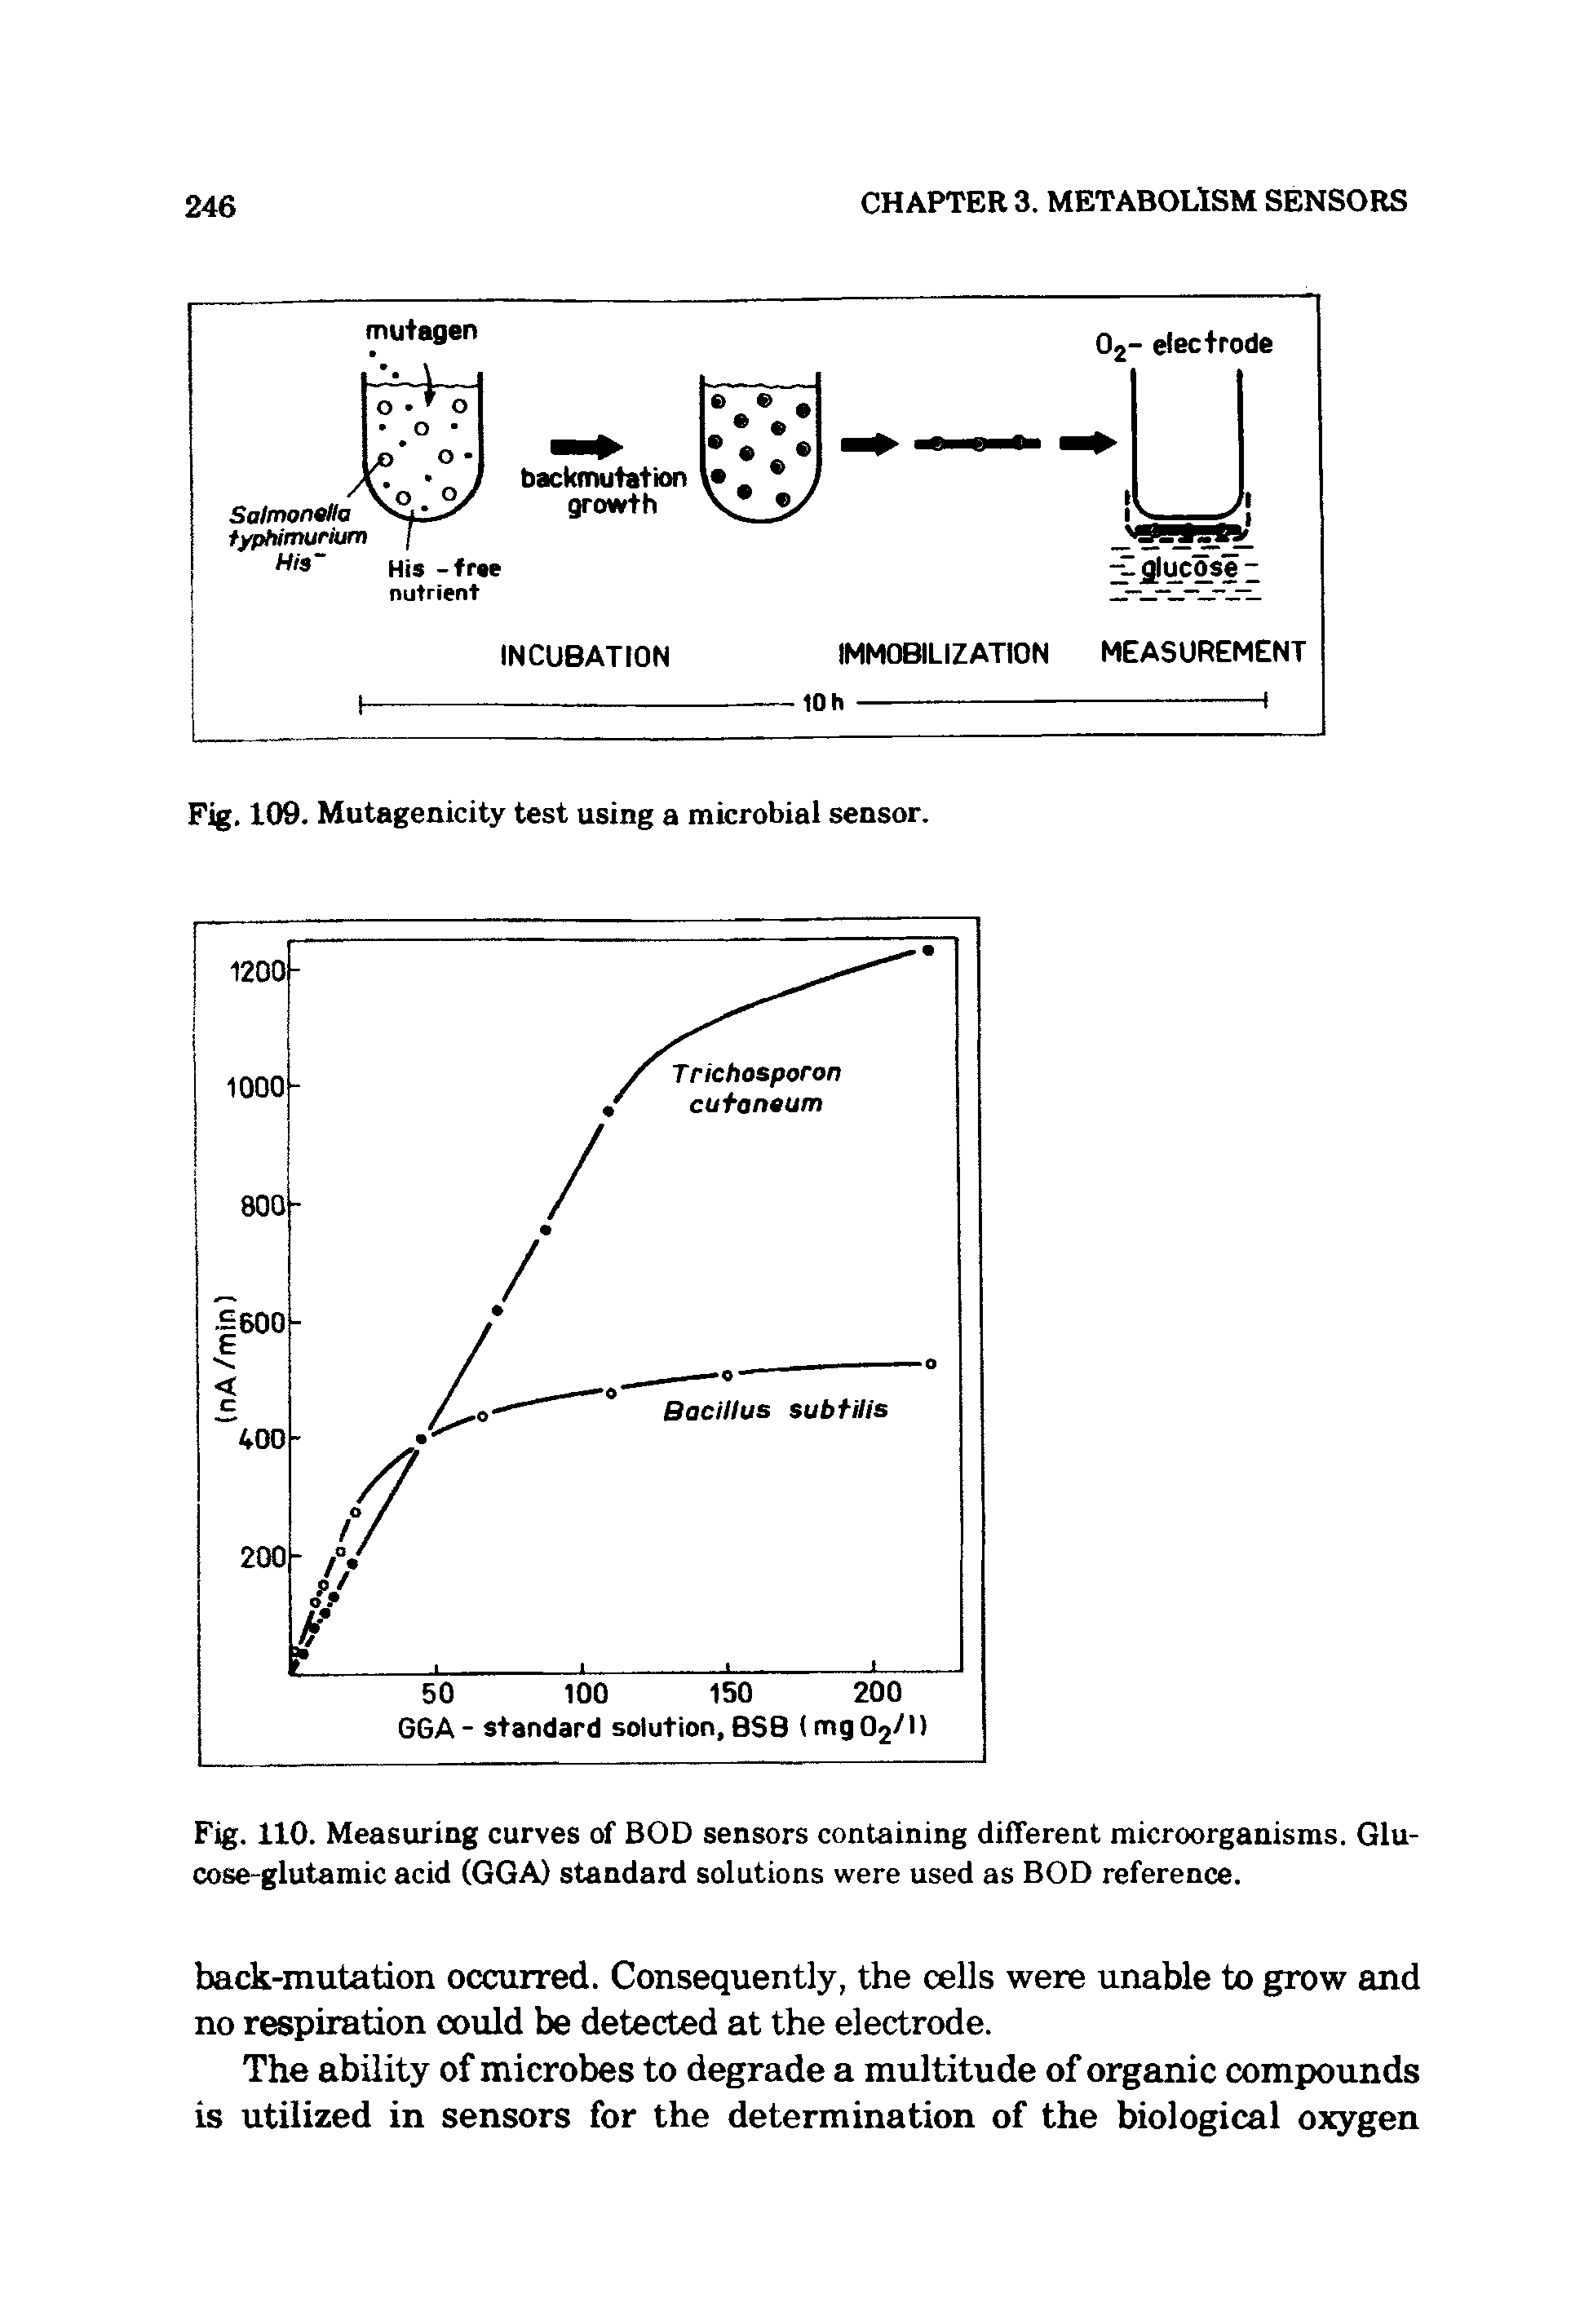 Fig. 110. Measuring curves of BOD sensors containing different microorganisms. Glucose-glutamic acid (GGA) standard solutions were used as BOD reference.